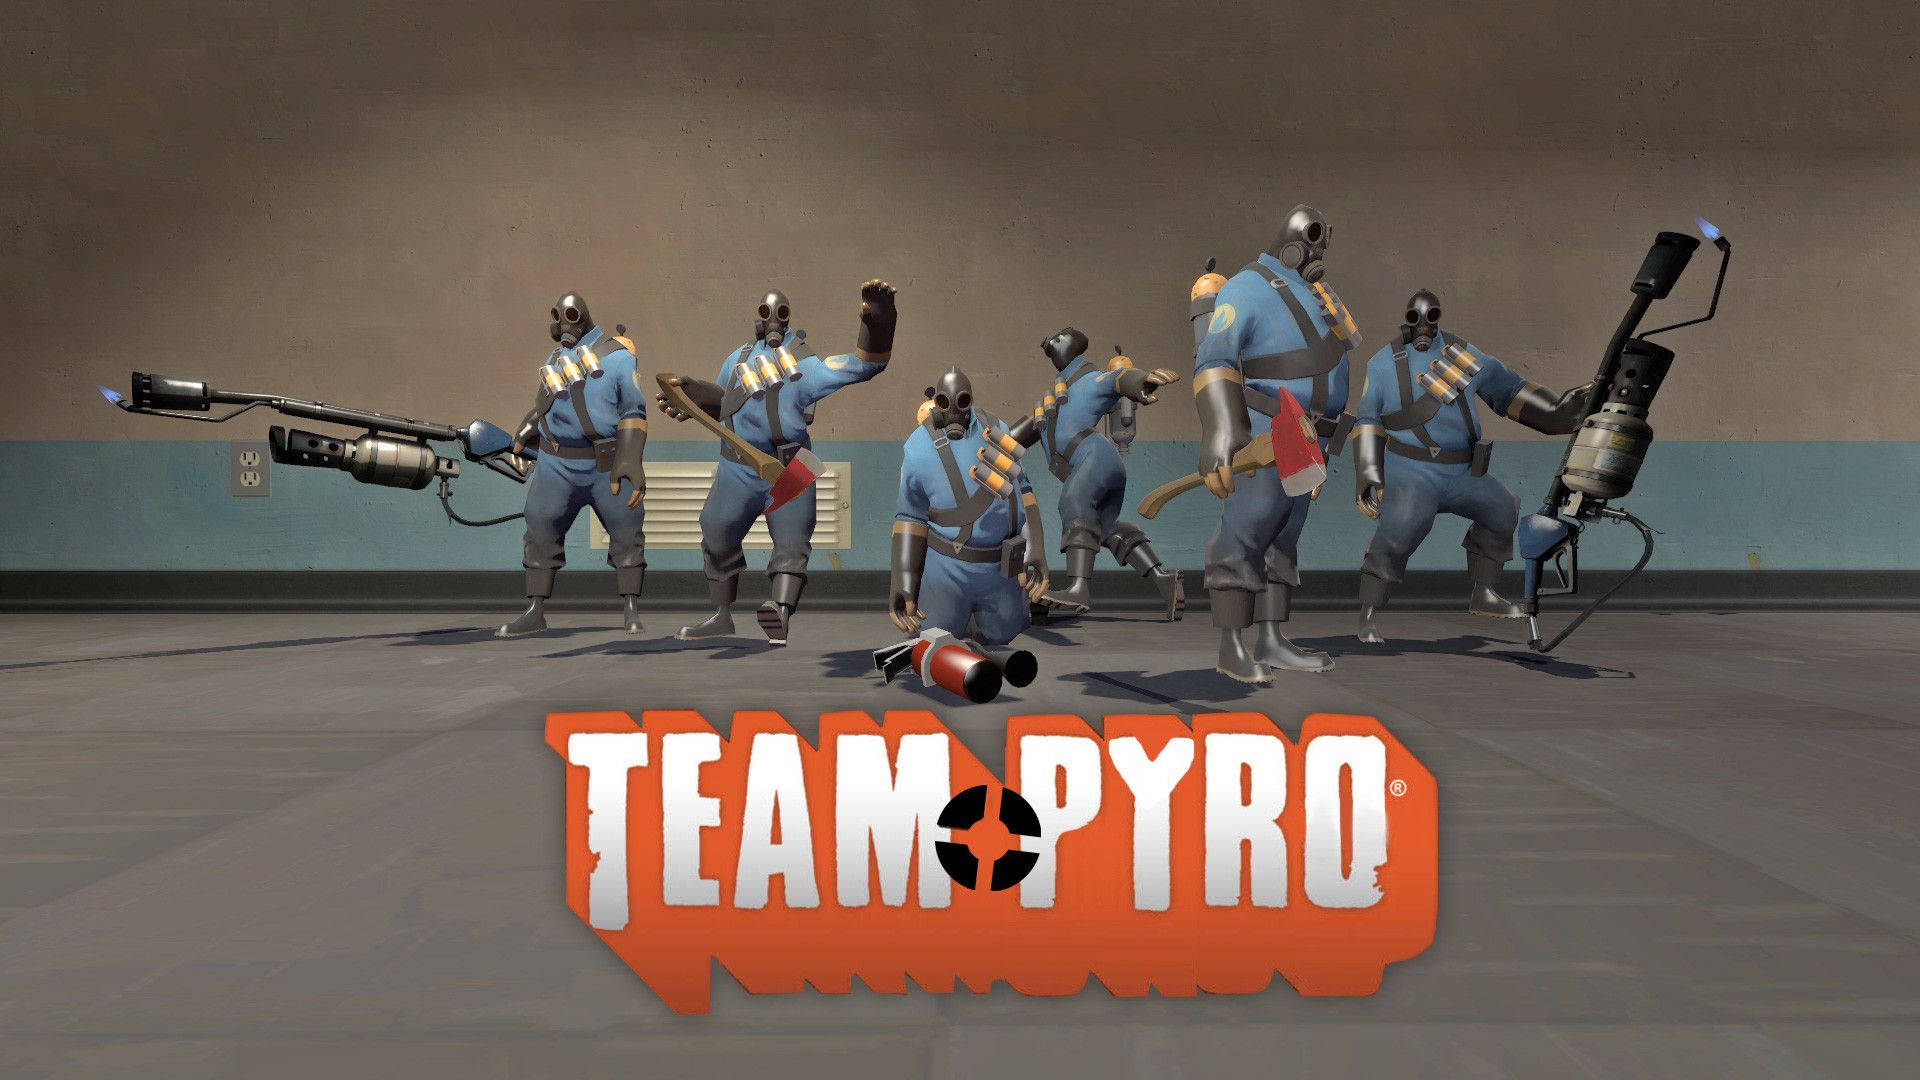 Pyro, The Blazing Character From Team Fortress 2.